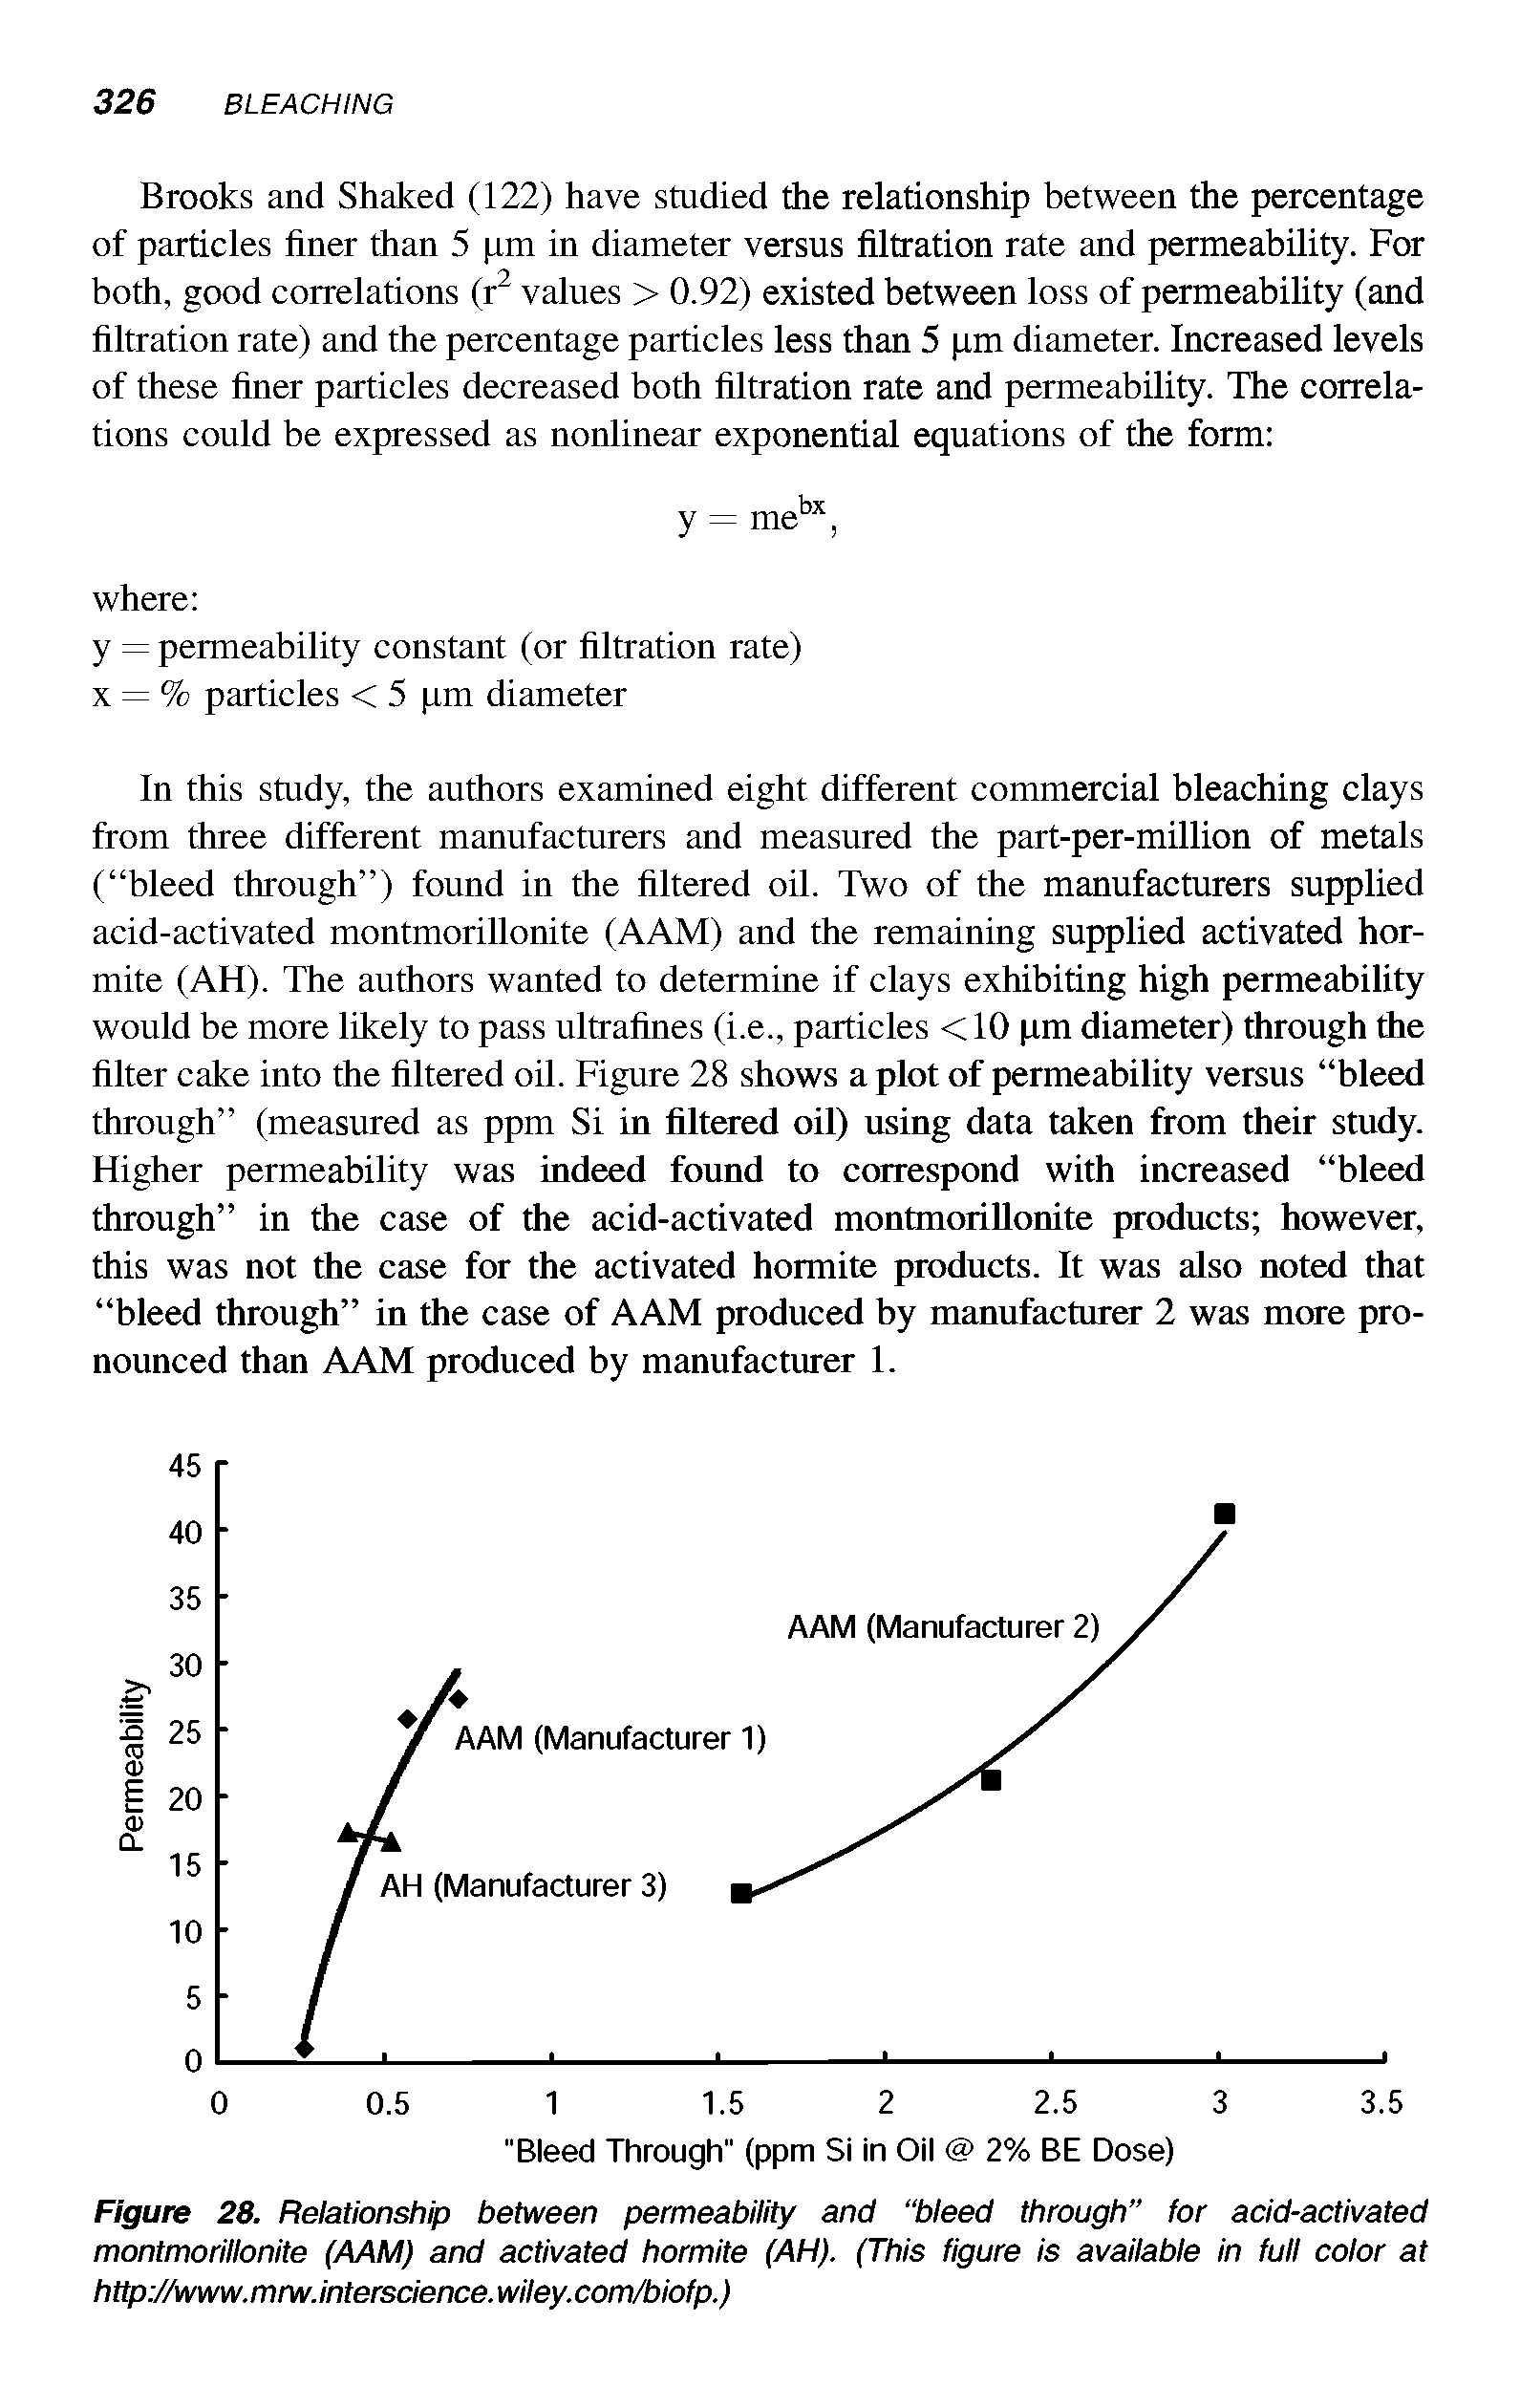 Figure 28. Relationship between permeability and bleed through for acid-activated montmorillonite (AAM) and activated hormite (AH). (This figure is available in full color at http //www.mrw.interscience.wiley.com/biofp.)...